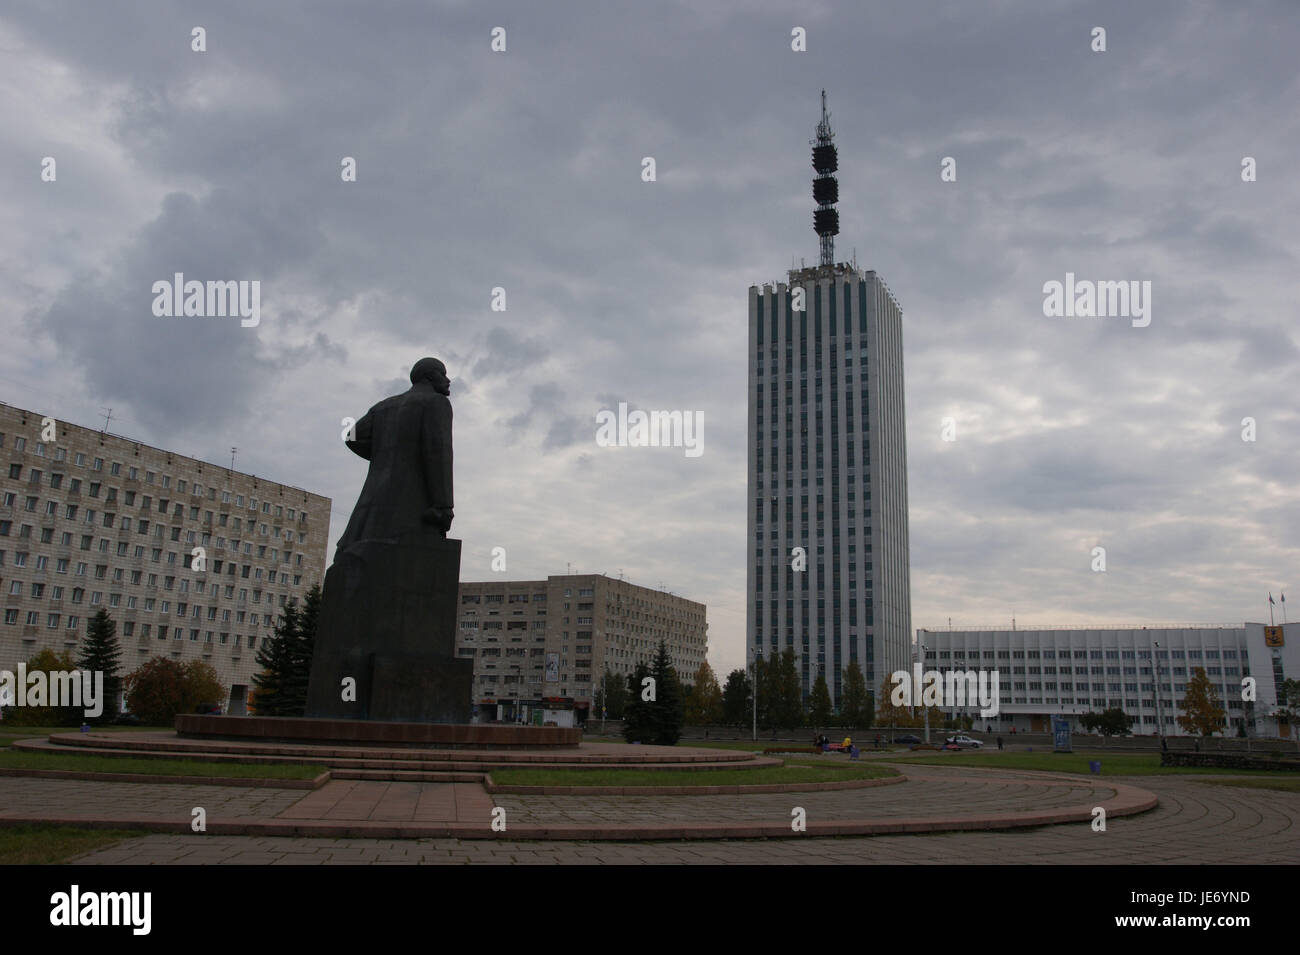 Russia, Archangelsk, space Lenin, statue, television tower, space Lenin, Lenin-Statue, Leninstatue, politics, story, tourism, building, residential houses, houses, tower, place of interest, communism, dictator, tourist, person, Stock Photo